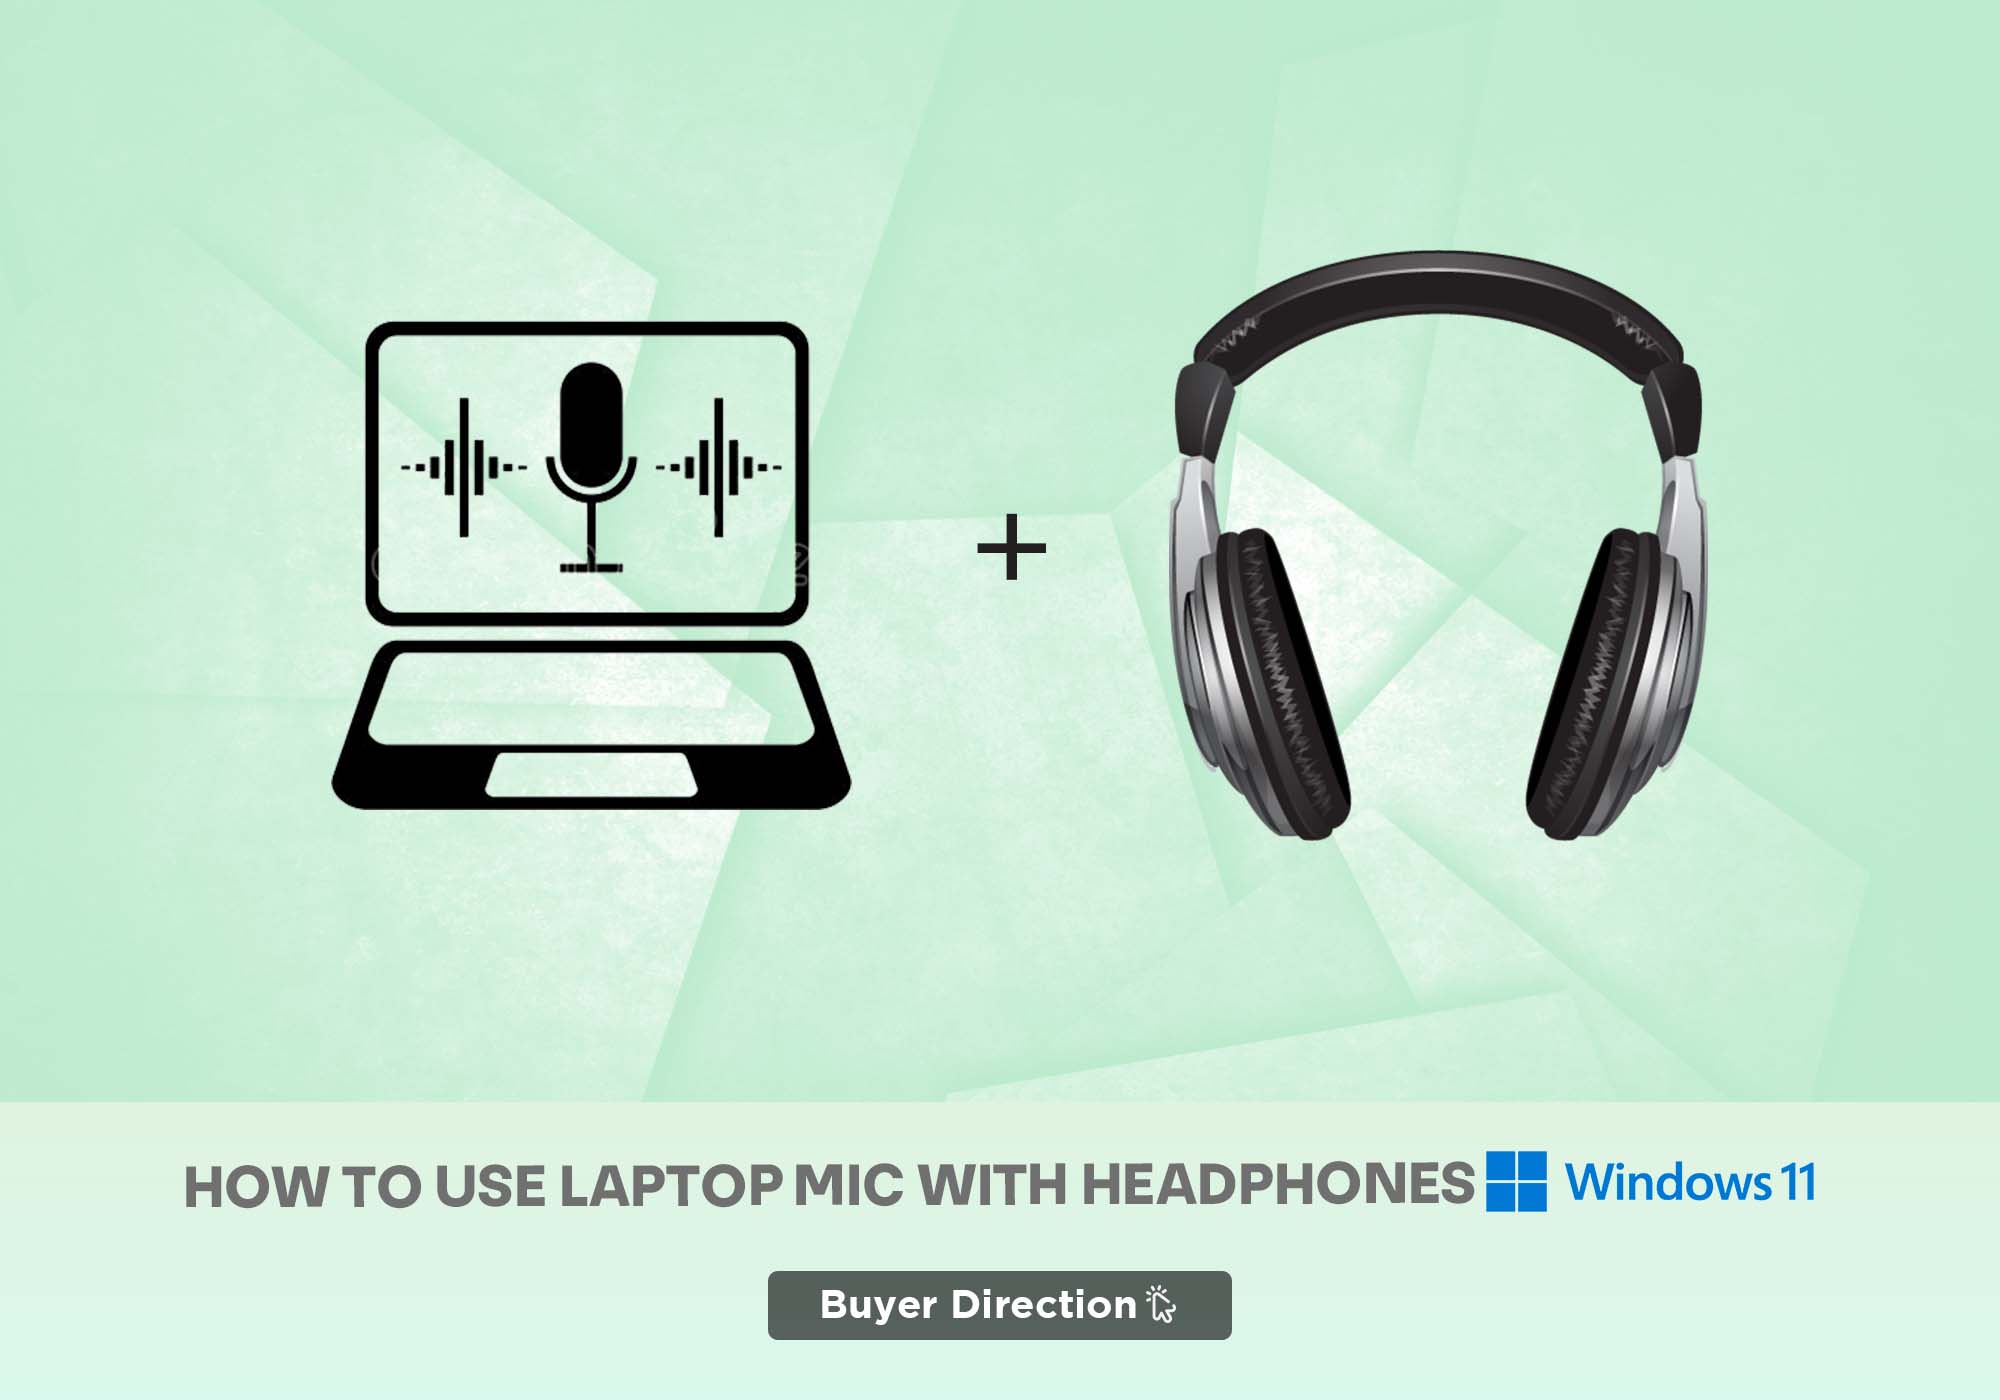 How To Use Laptop Mic With Headphones Windows 11